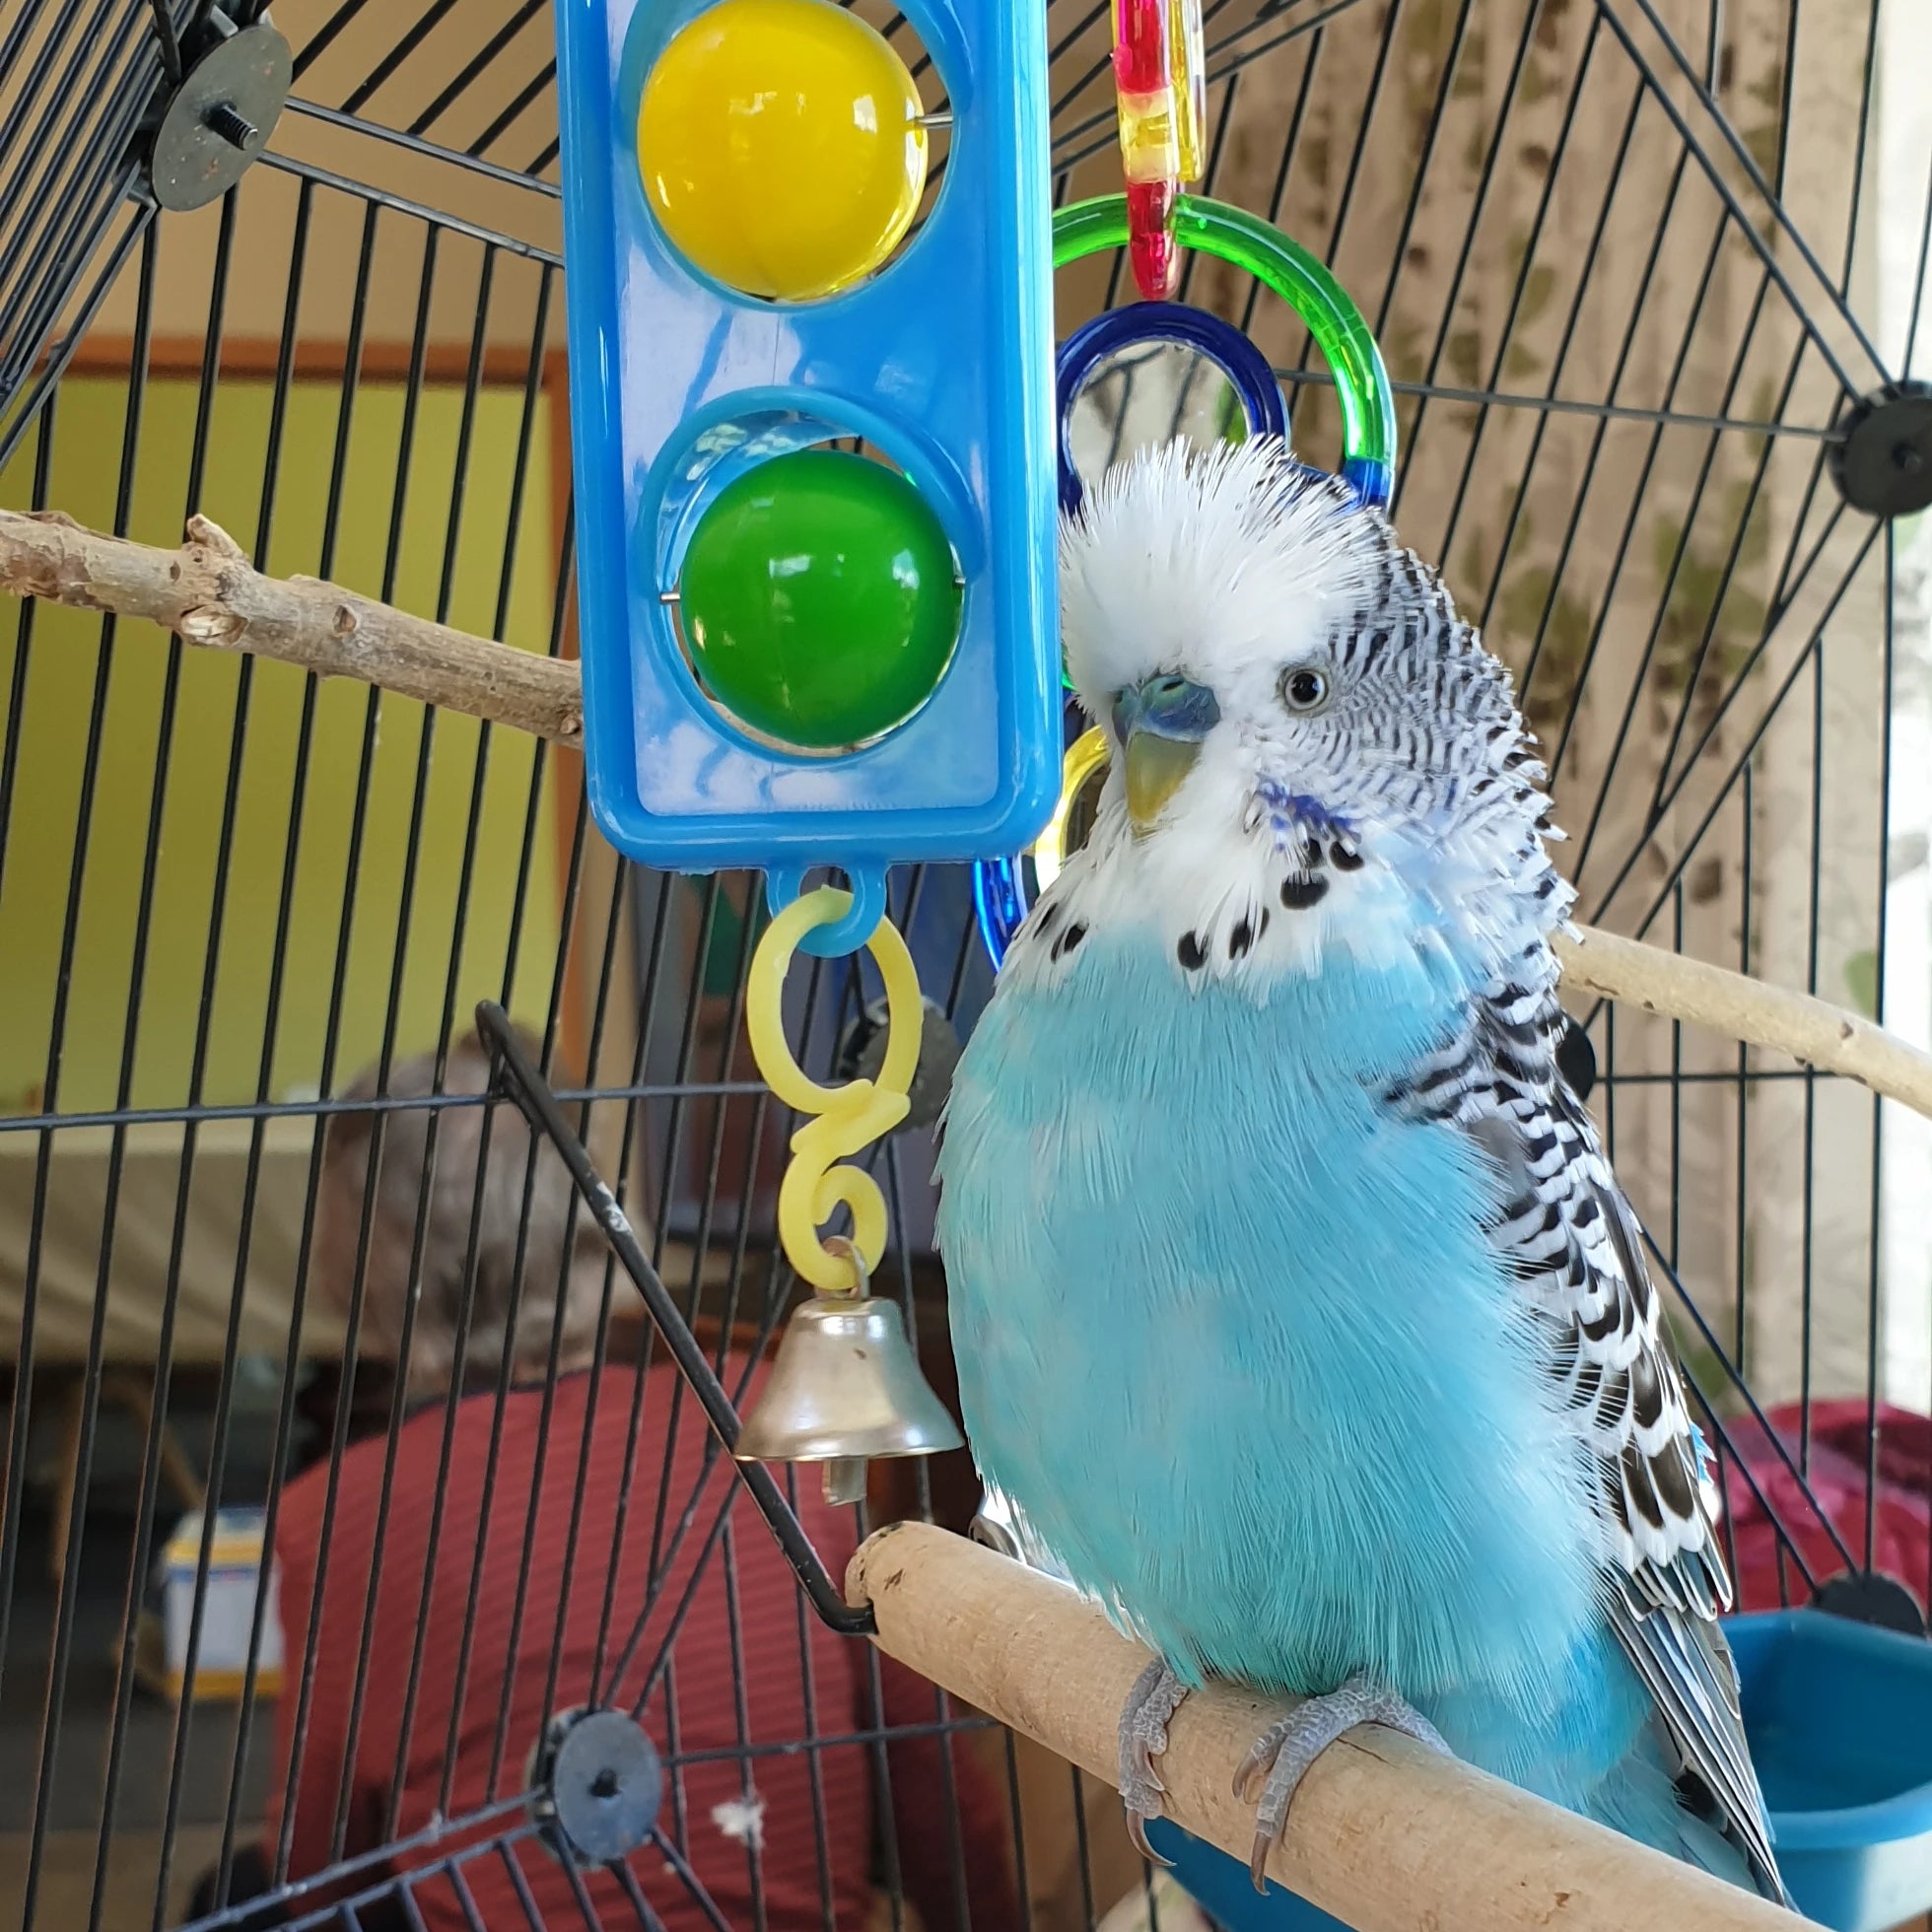 In time you will work out what toys seem to excite your budgies the most